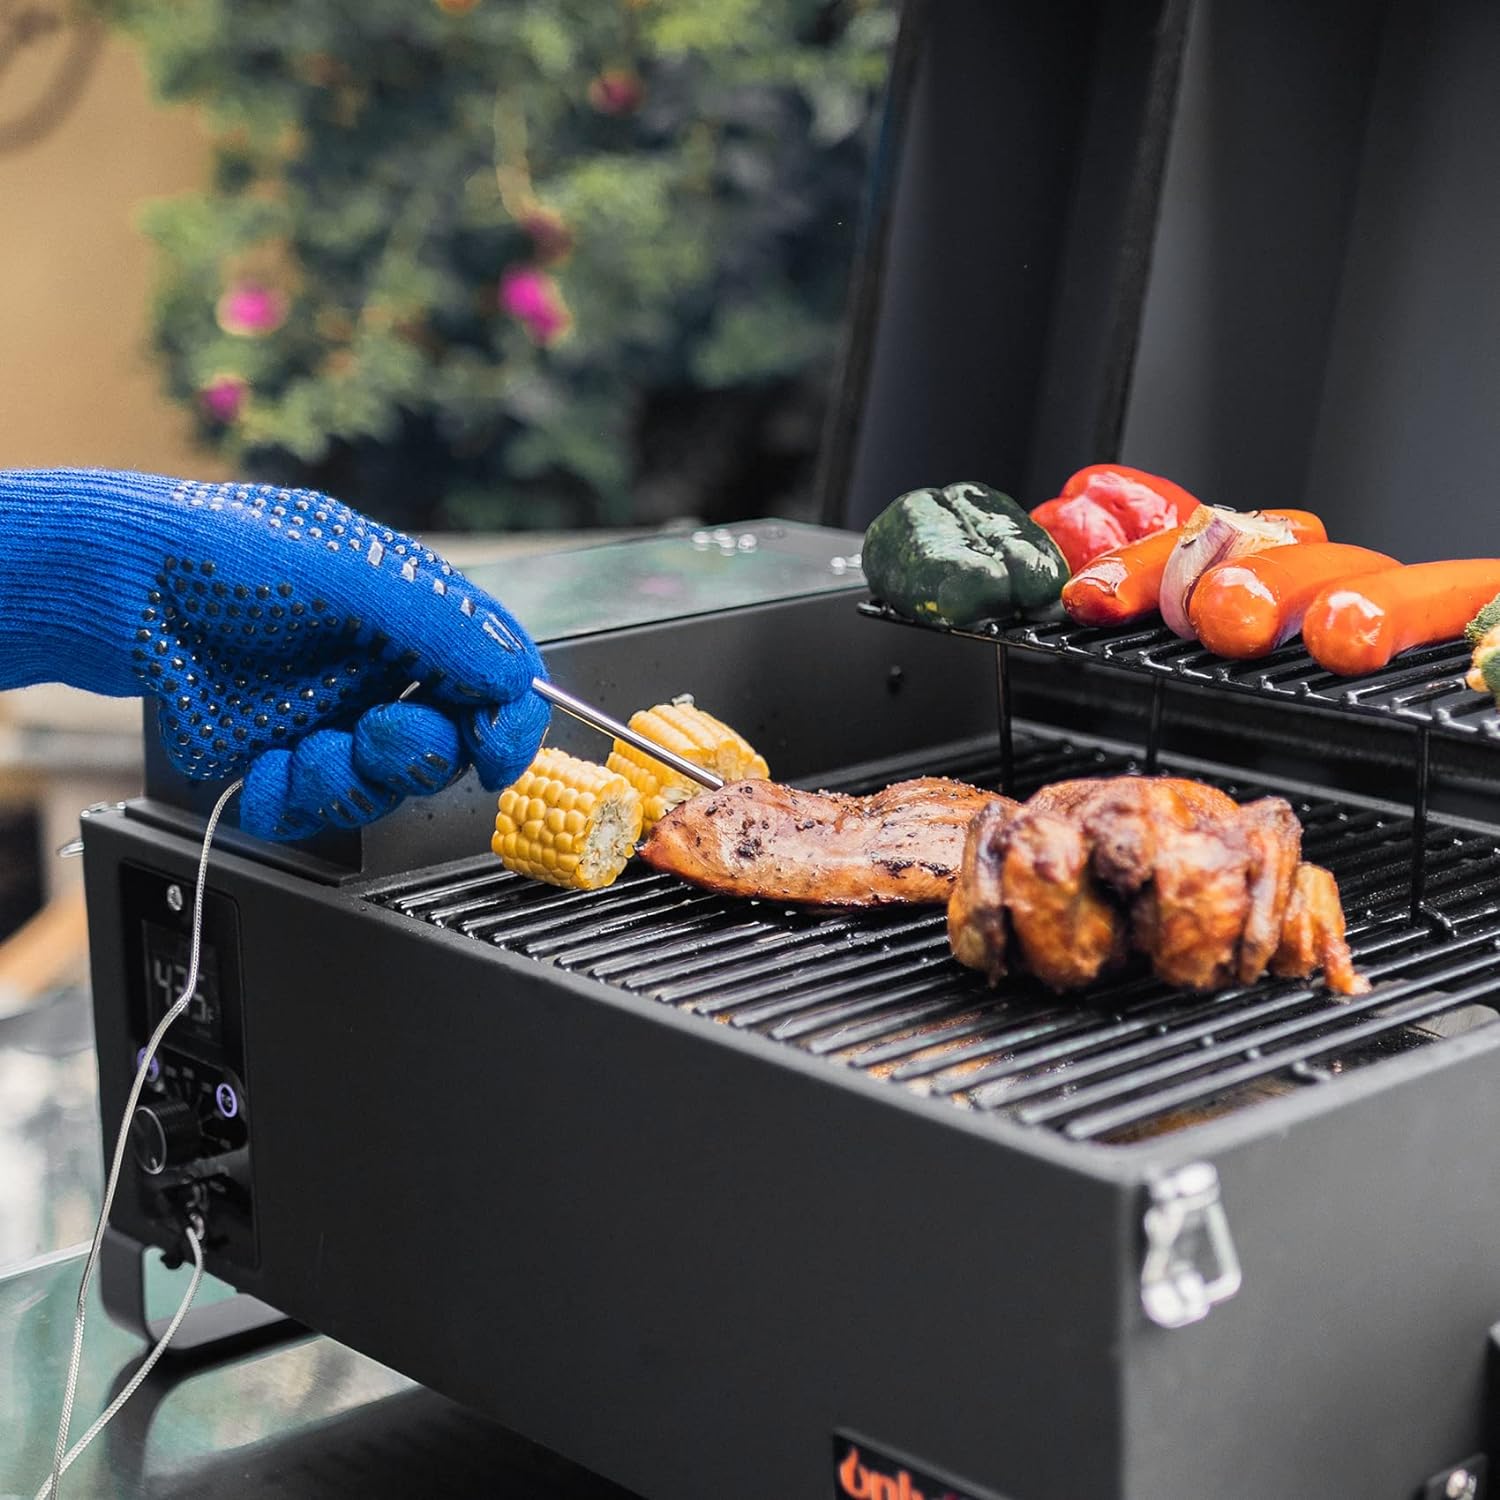 Onlyfire BBQ Wood Pellet Grill Smoker with Digital Control, LED Screen, Meat Probe  2 Tiers Cooking Area, Portable Tabletop Grilling Stove for BBQ, Smoke, Bake and Roast, RV Camping, Blue